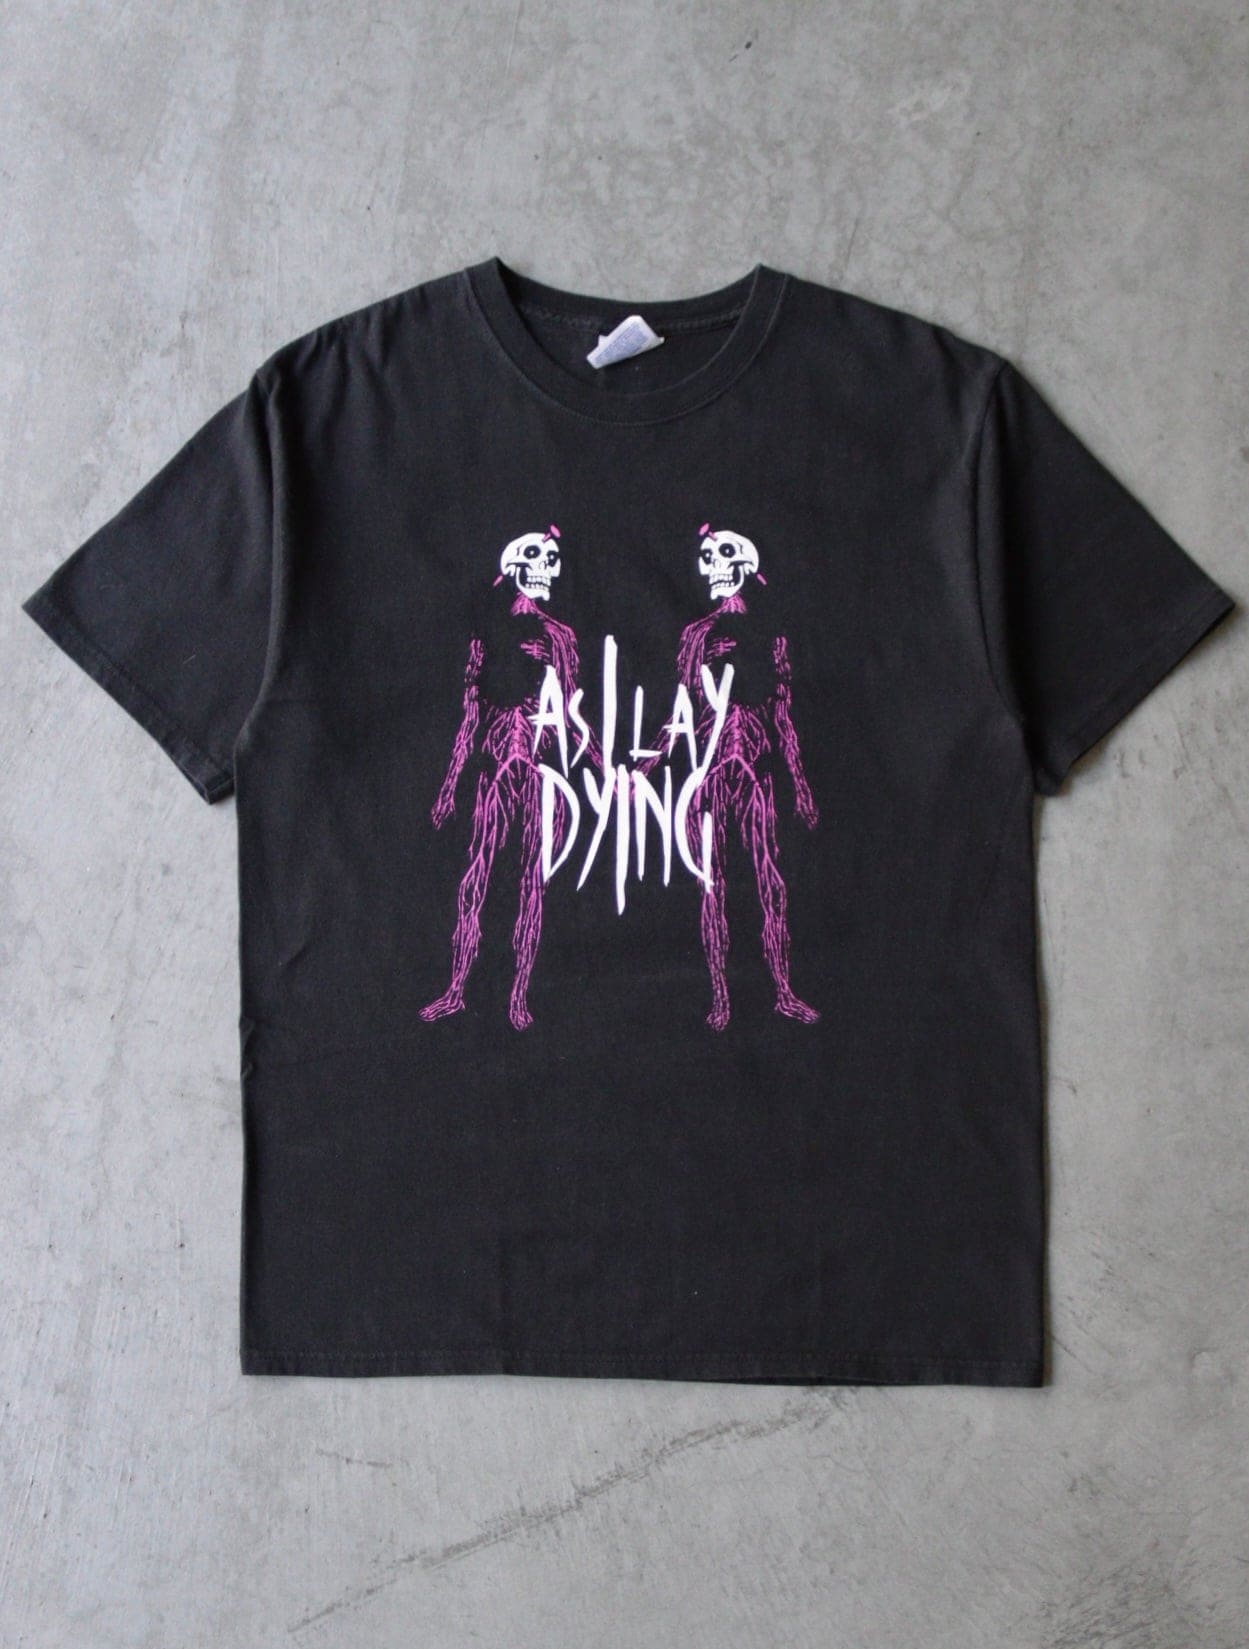 2000S AS I LAY DYING BAND TEE